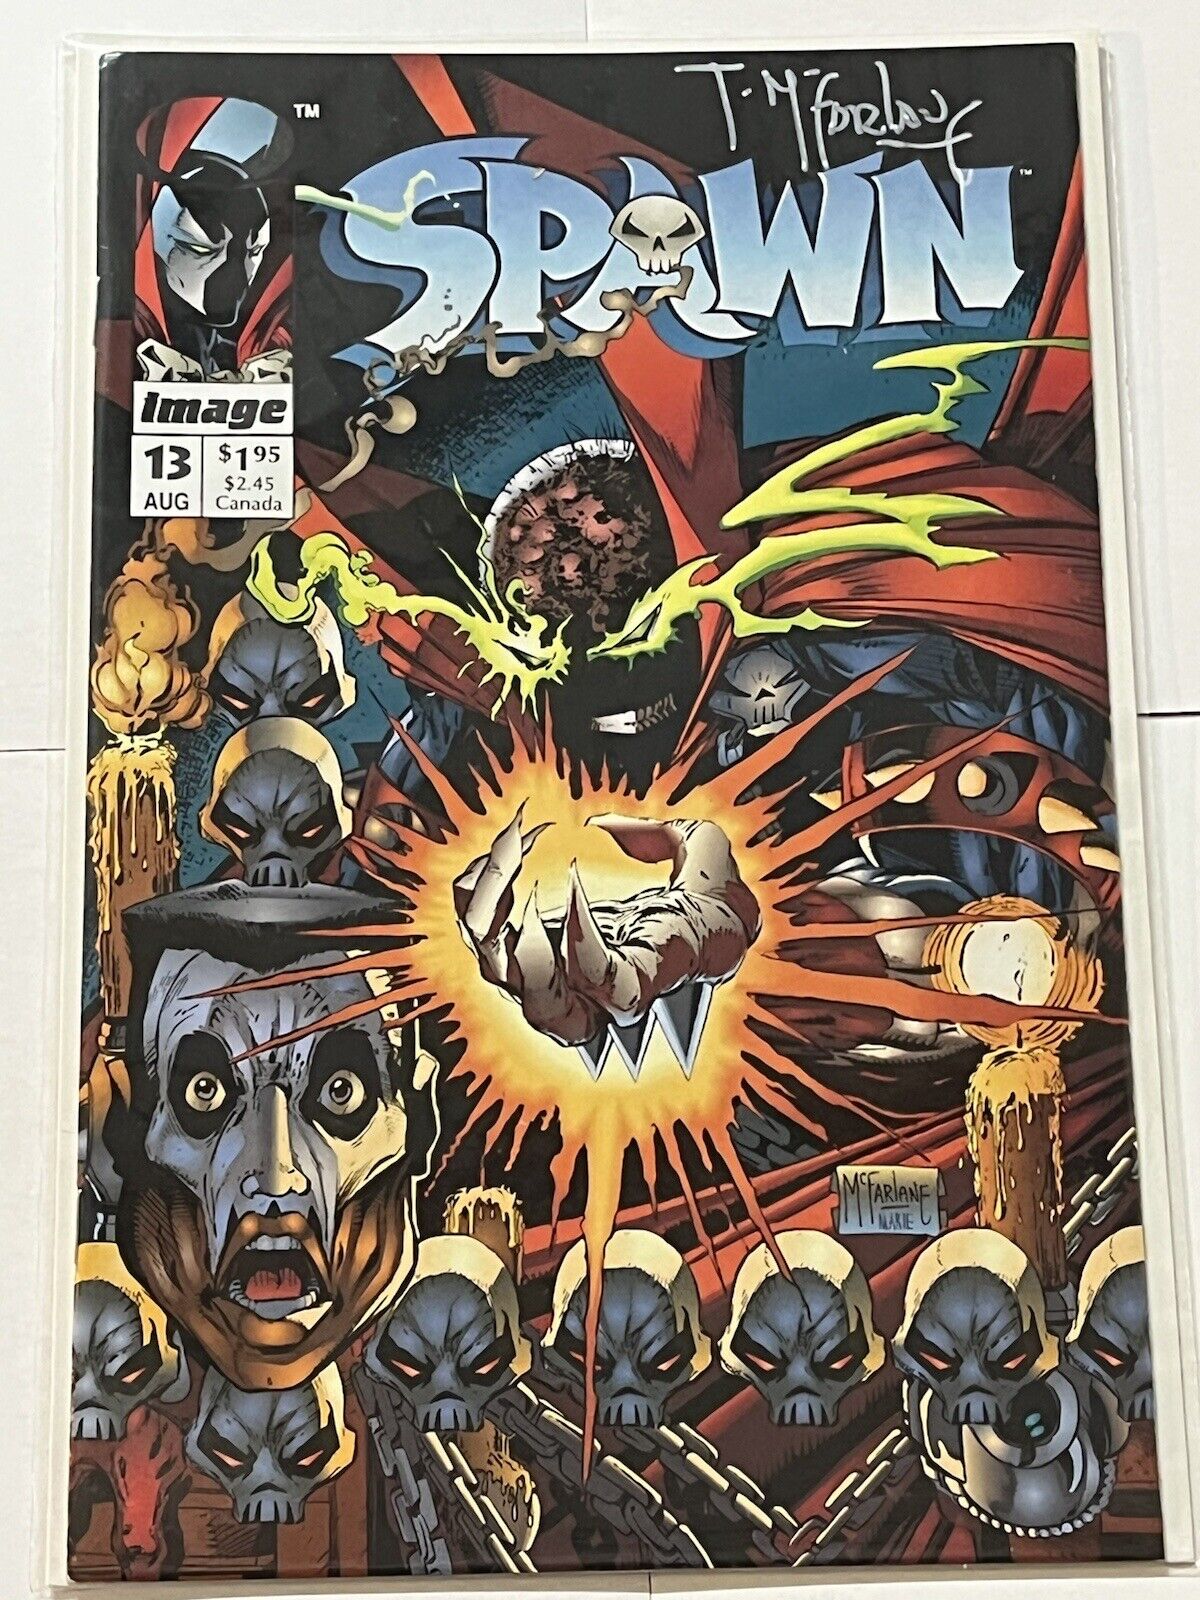 Todd McFarlane REAL hand SIGNED Spawn Comic Book  Issue #13 August 1993 | Combin